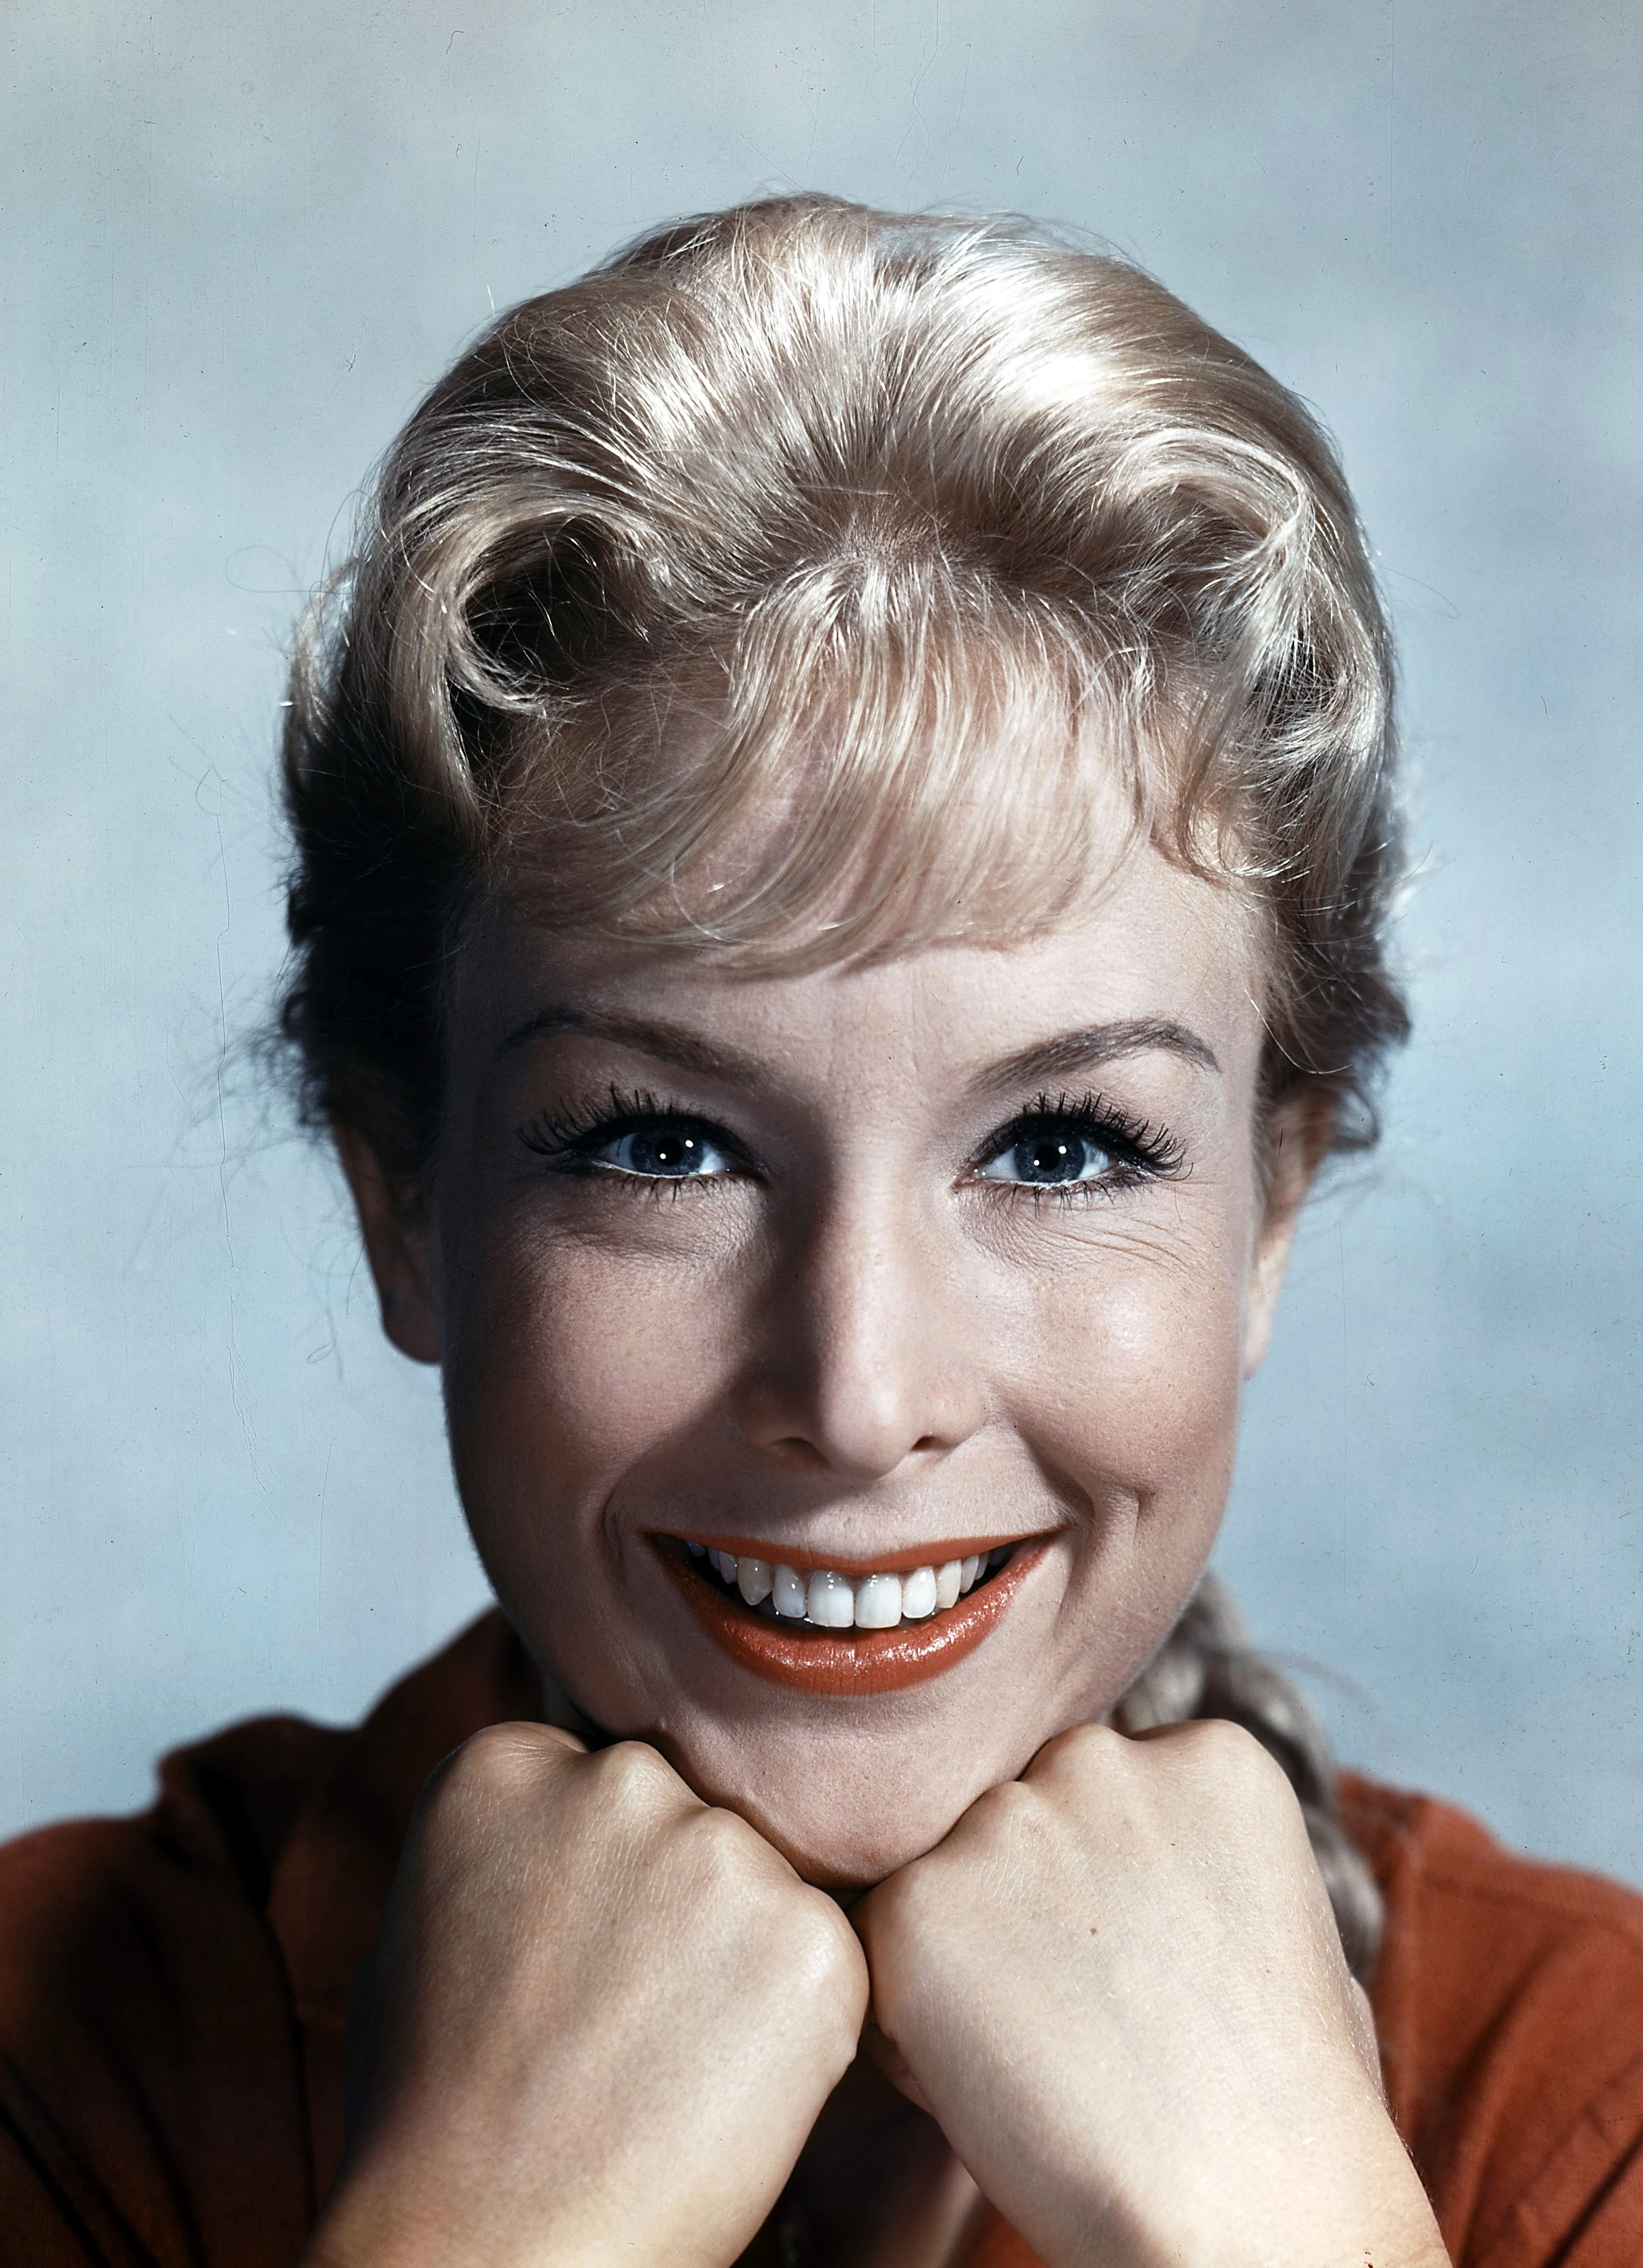 A portrait of Barbara Eden in the film "A Private's Affair" in 1959. | Source: Getty Images